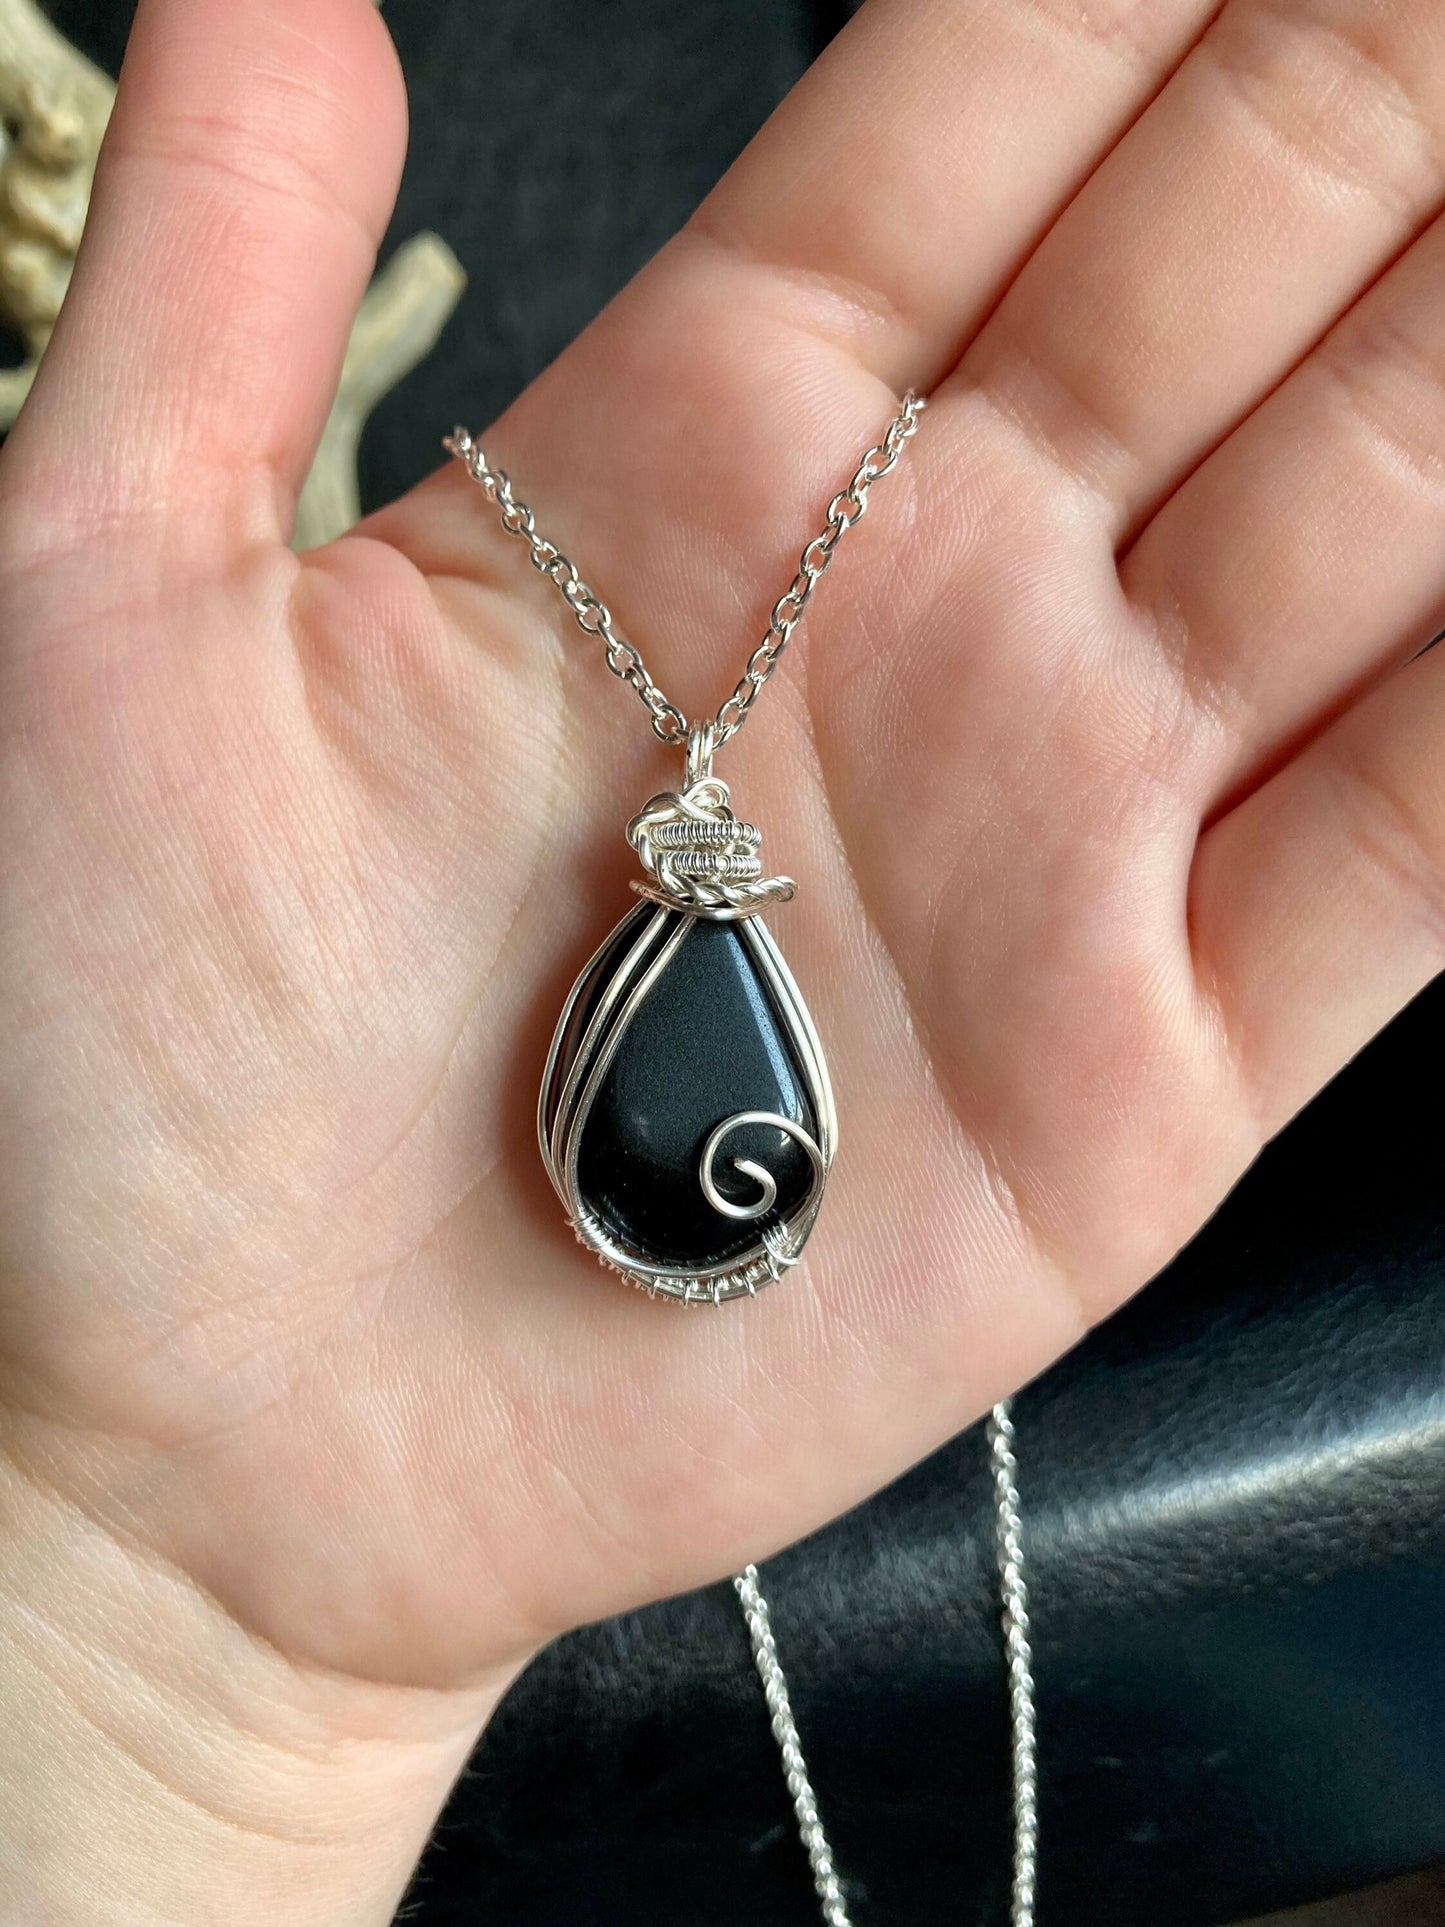 Obsidian pendant handmade necklace wire wrapped natural stone with 18 inch length chain